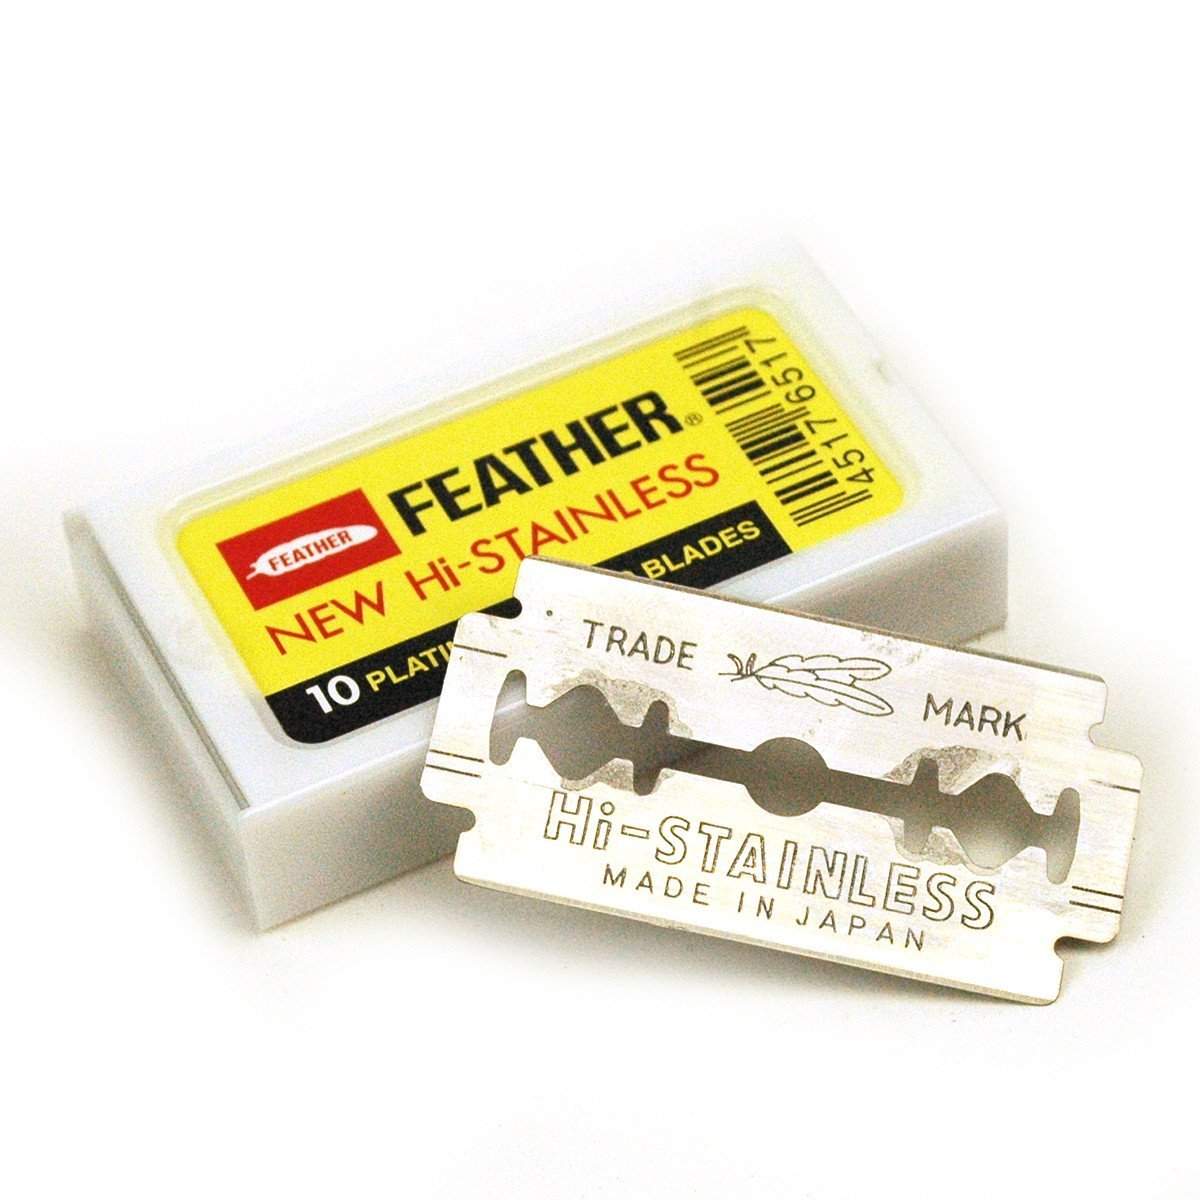 Feather Hi Stainless Platinum Double Edge Blades 10 Pack 2 ?v=1520620932